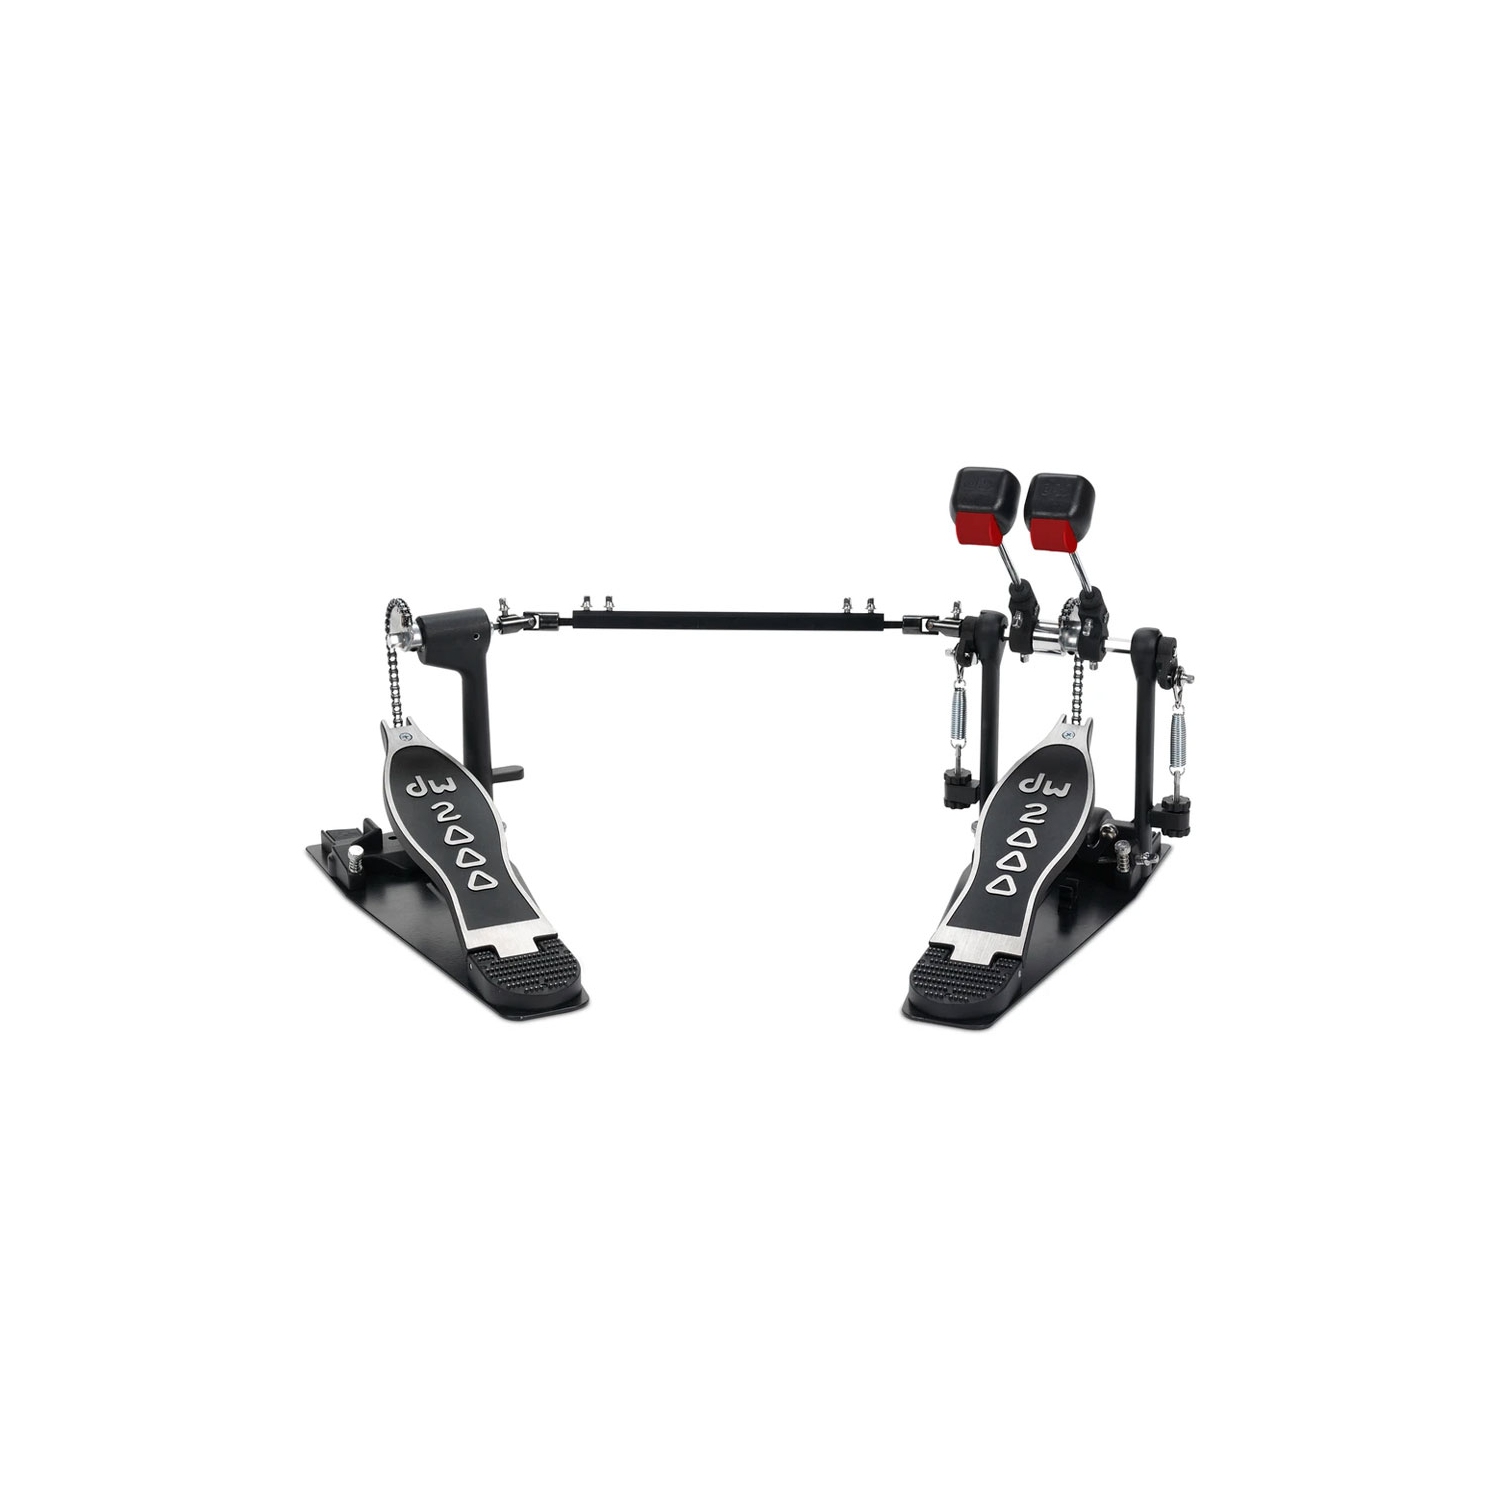 DW 2000 Series DW 2000 Double Single Bass Drum Pedal | Best Buy Canada